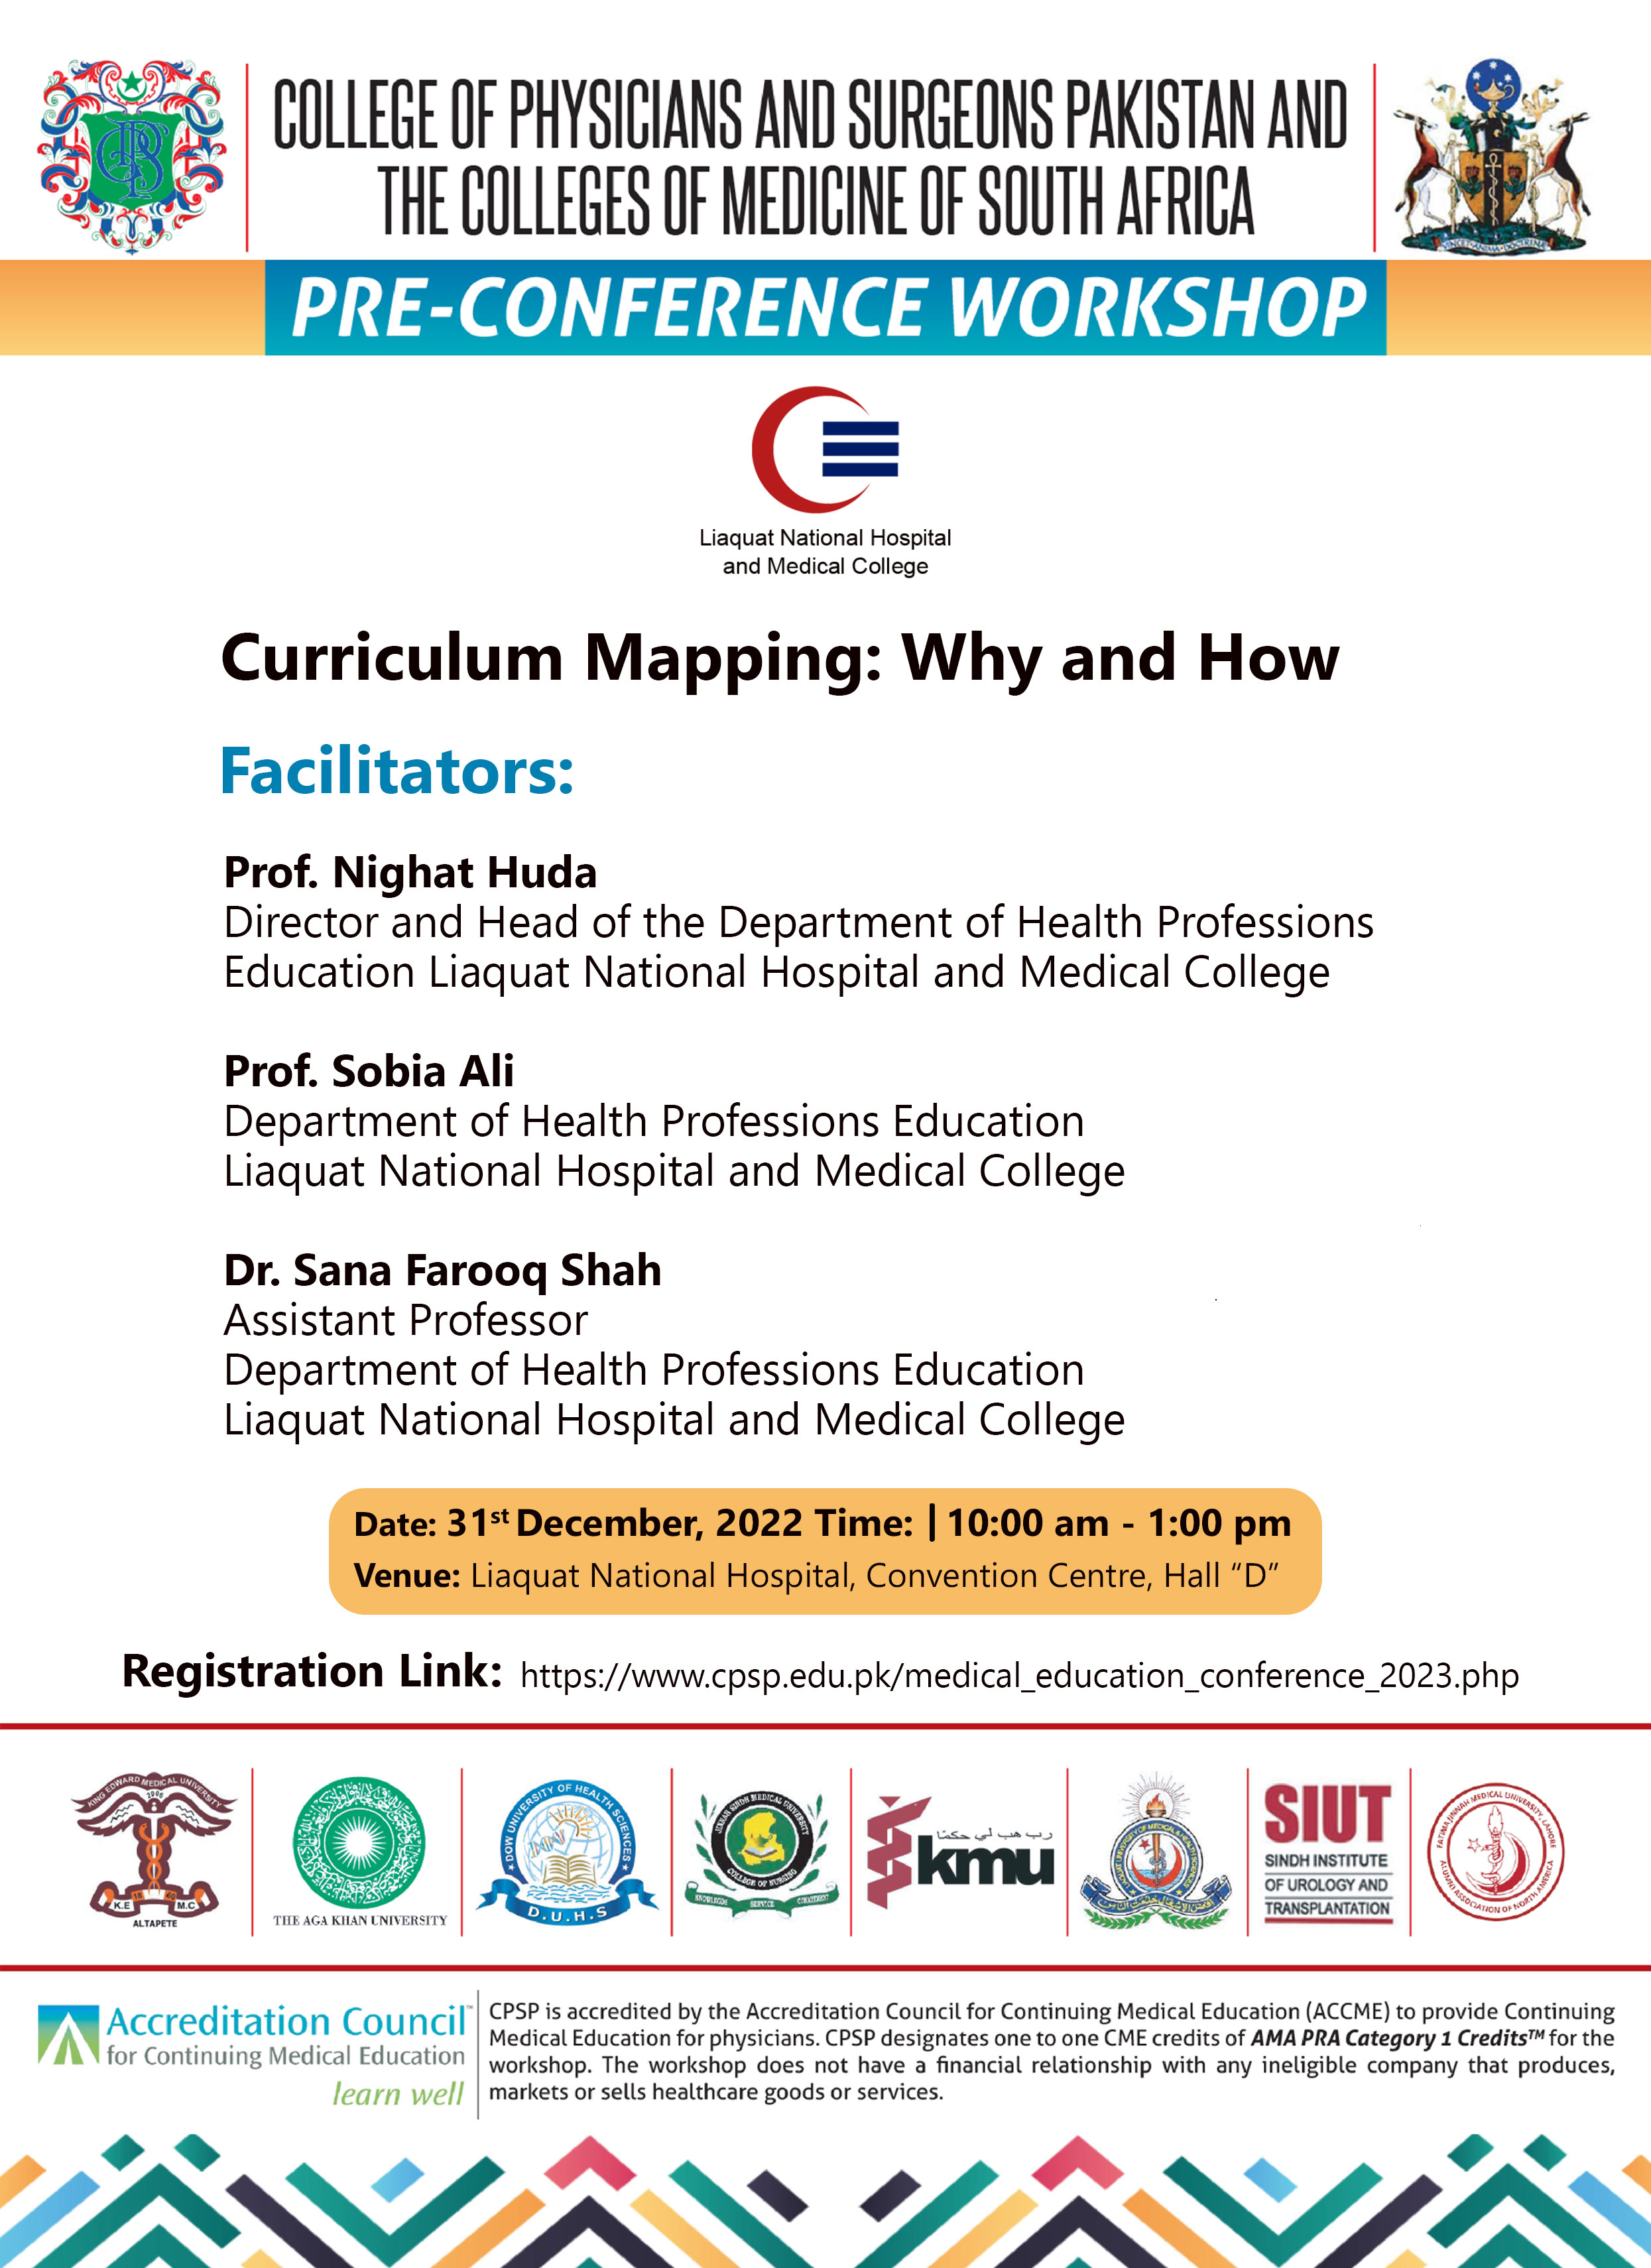 Pre-conference Inaugural Workshop- Curriculum Mapping: Why and How